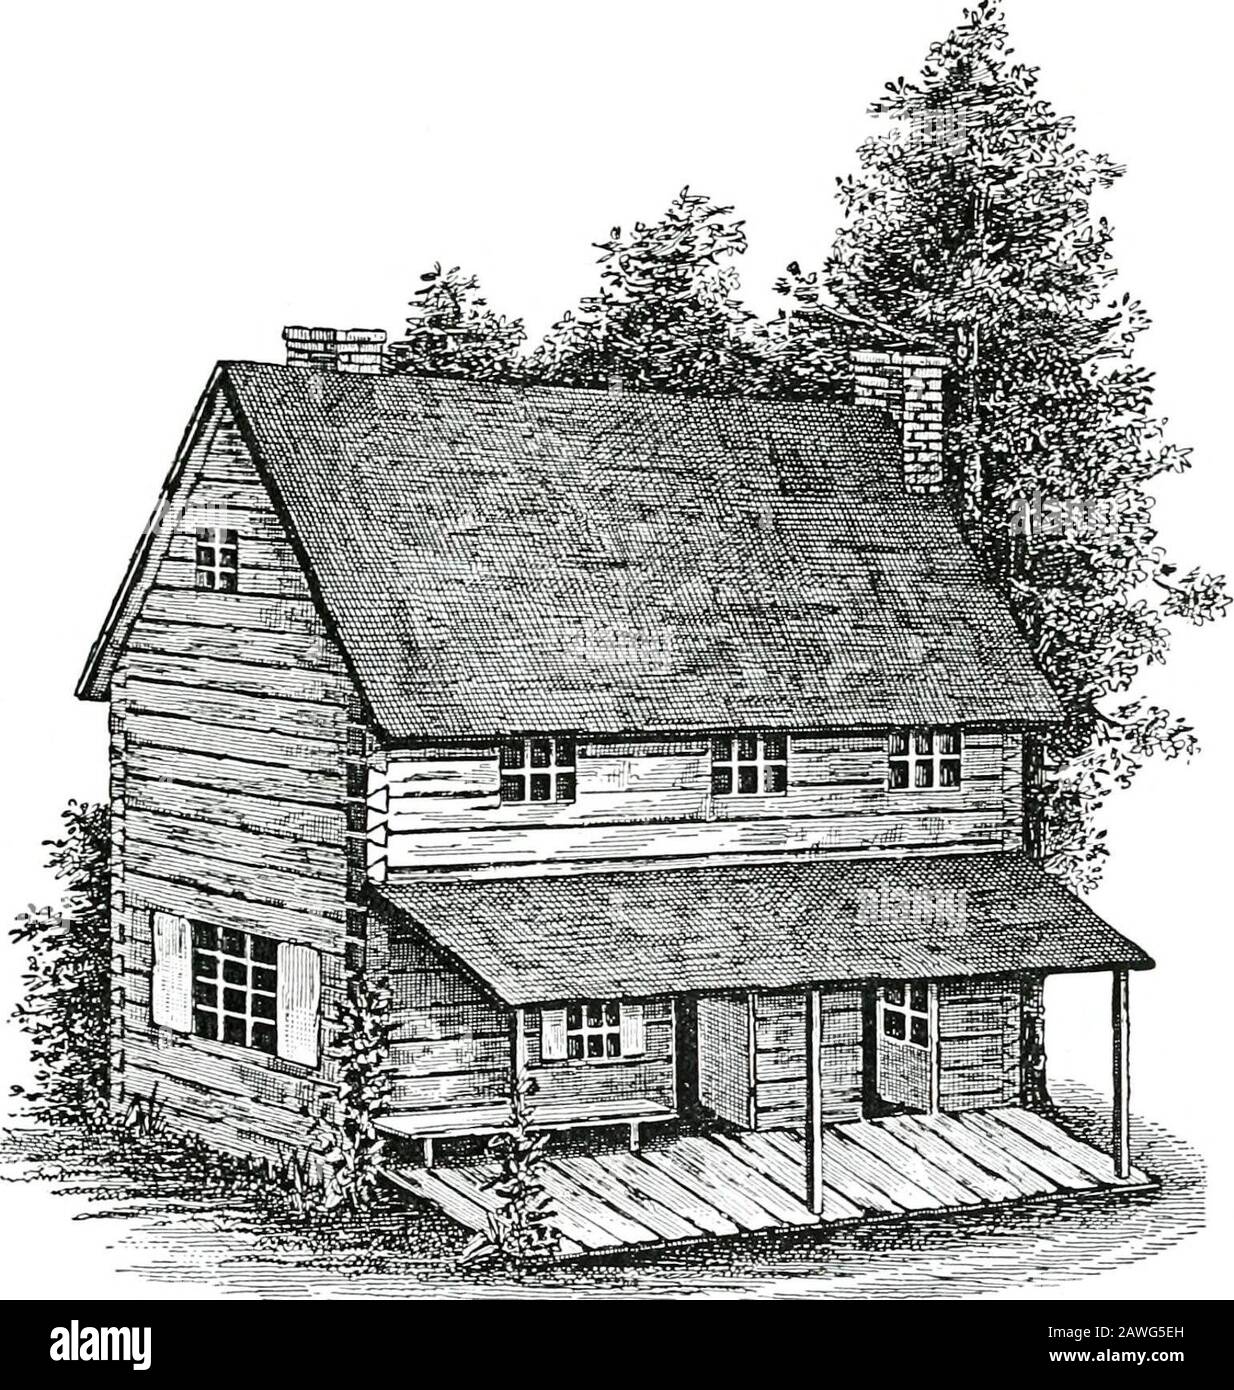 History of Northumberland County, Pennsylvania . works probably began as soon as it became evident that they would beno longer required for military purposes. Colonel Samuel Hunter lived atthe fort until his death in 1784; his residence and that of his family afterhis decease was the building originally erected as the colonels quarters, ofwhich an engraving is herewith given. It is reproduced from a painting in THE COLONIAL PERIOD. 81 the possession of Captain John Buyers, of Selinsgrove, Pennsylvania, whichbears the following indorsement: A view of the old house at FortAugusta, one mile above Stock Photo